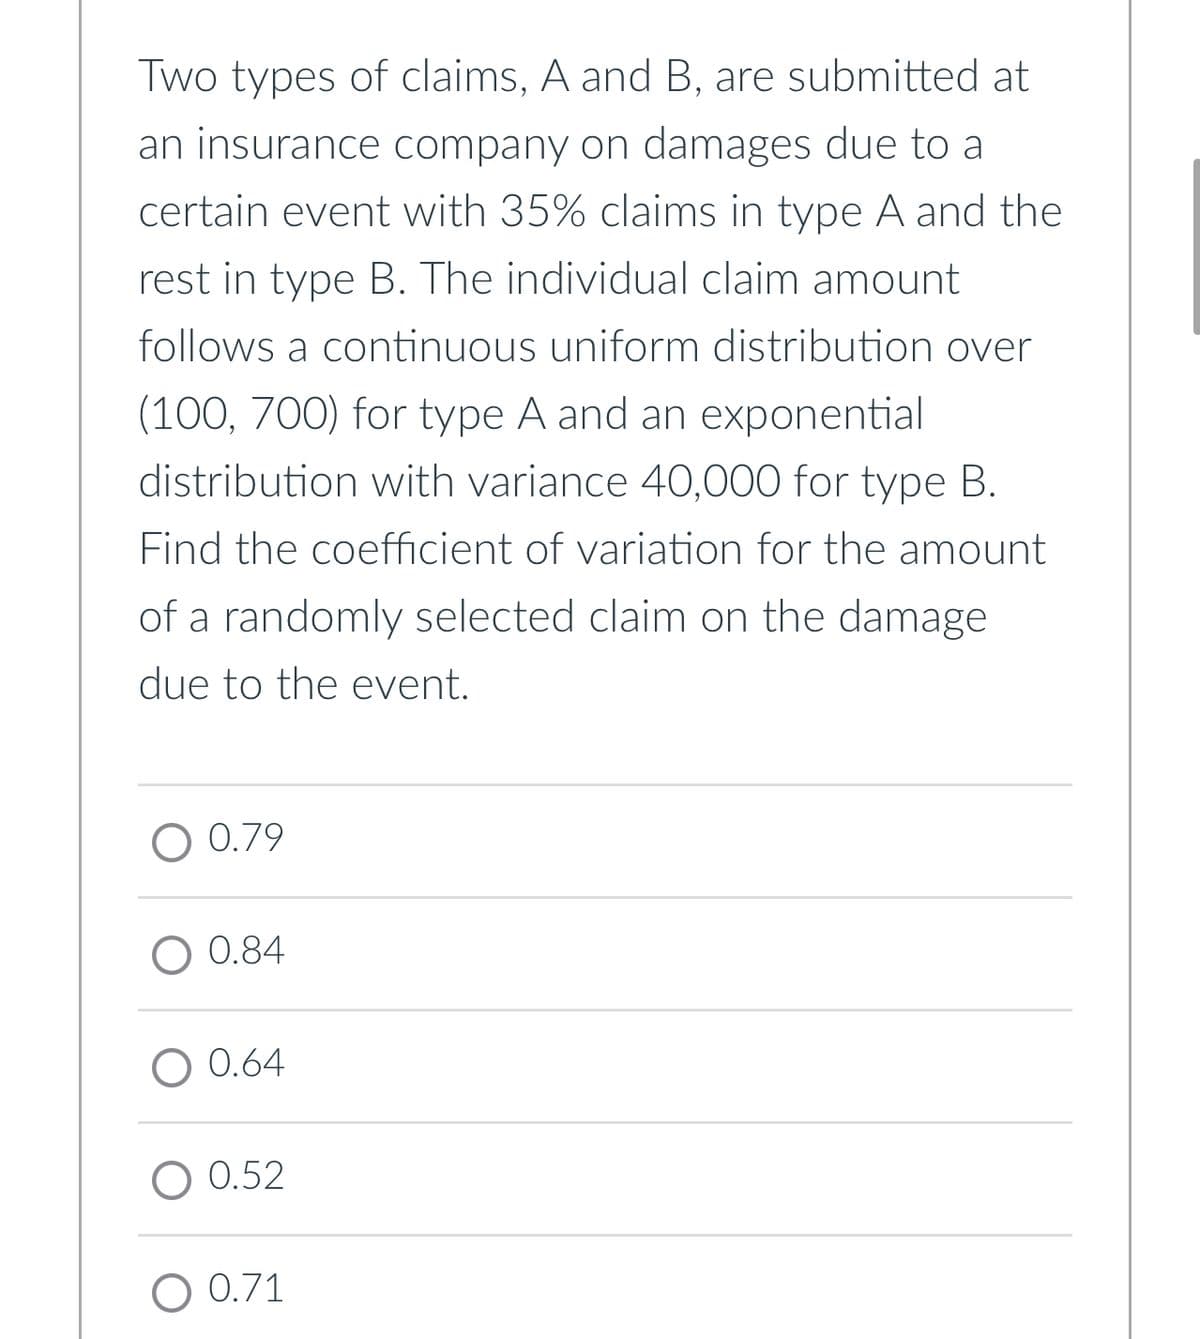 Two types of claims, A and B, are submitted at
an insurance company on damages due to a
certain event with 35% claims in type A and the
rest in type B. The individual claim amount
follows a continuous uniform distribution over
(100, 700) for type A and an exponential
distribution with variance 40,000 for type B.
Find the coefficient of variation for the amount
of a randomly selected claim on the damage
due to the event.
O 0.79
0.84
O 0.64
O 0.52
O 0.71